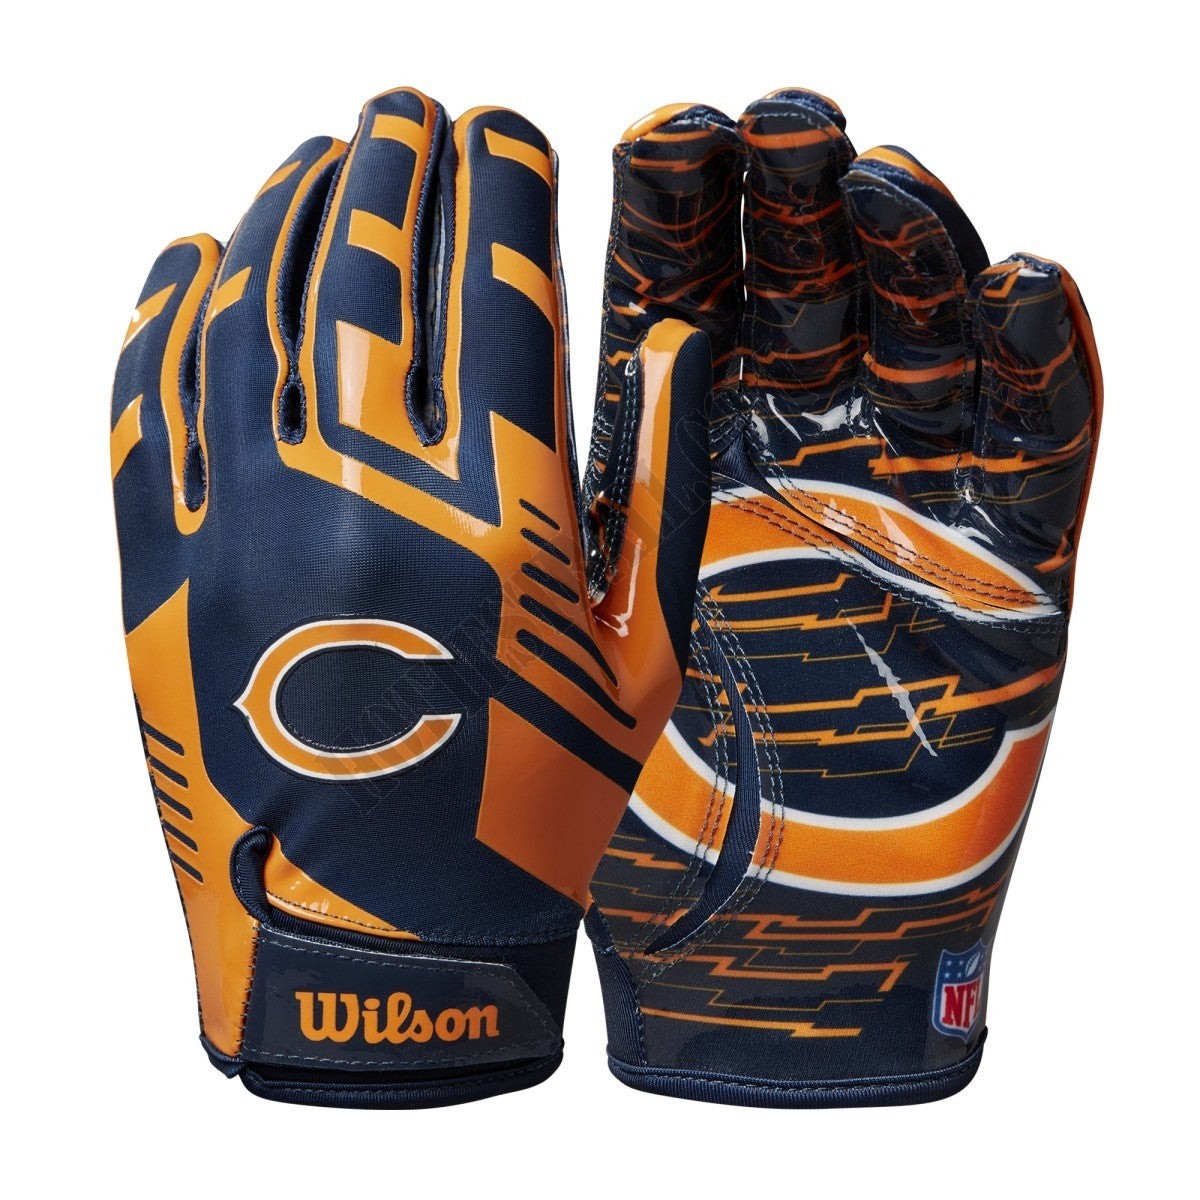 NFL Stretch Fit Receivers Gloves - Chicago Bears - Wilson Discount Store - NFL Stretch Fit Receivers Gloves - Chicago Bears - Wilson Discount Store